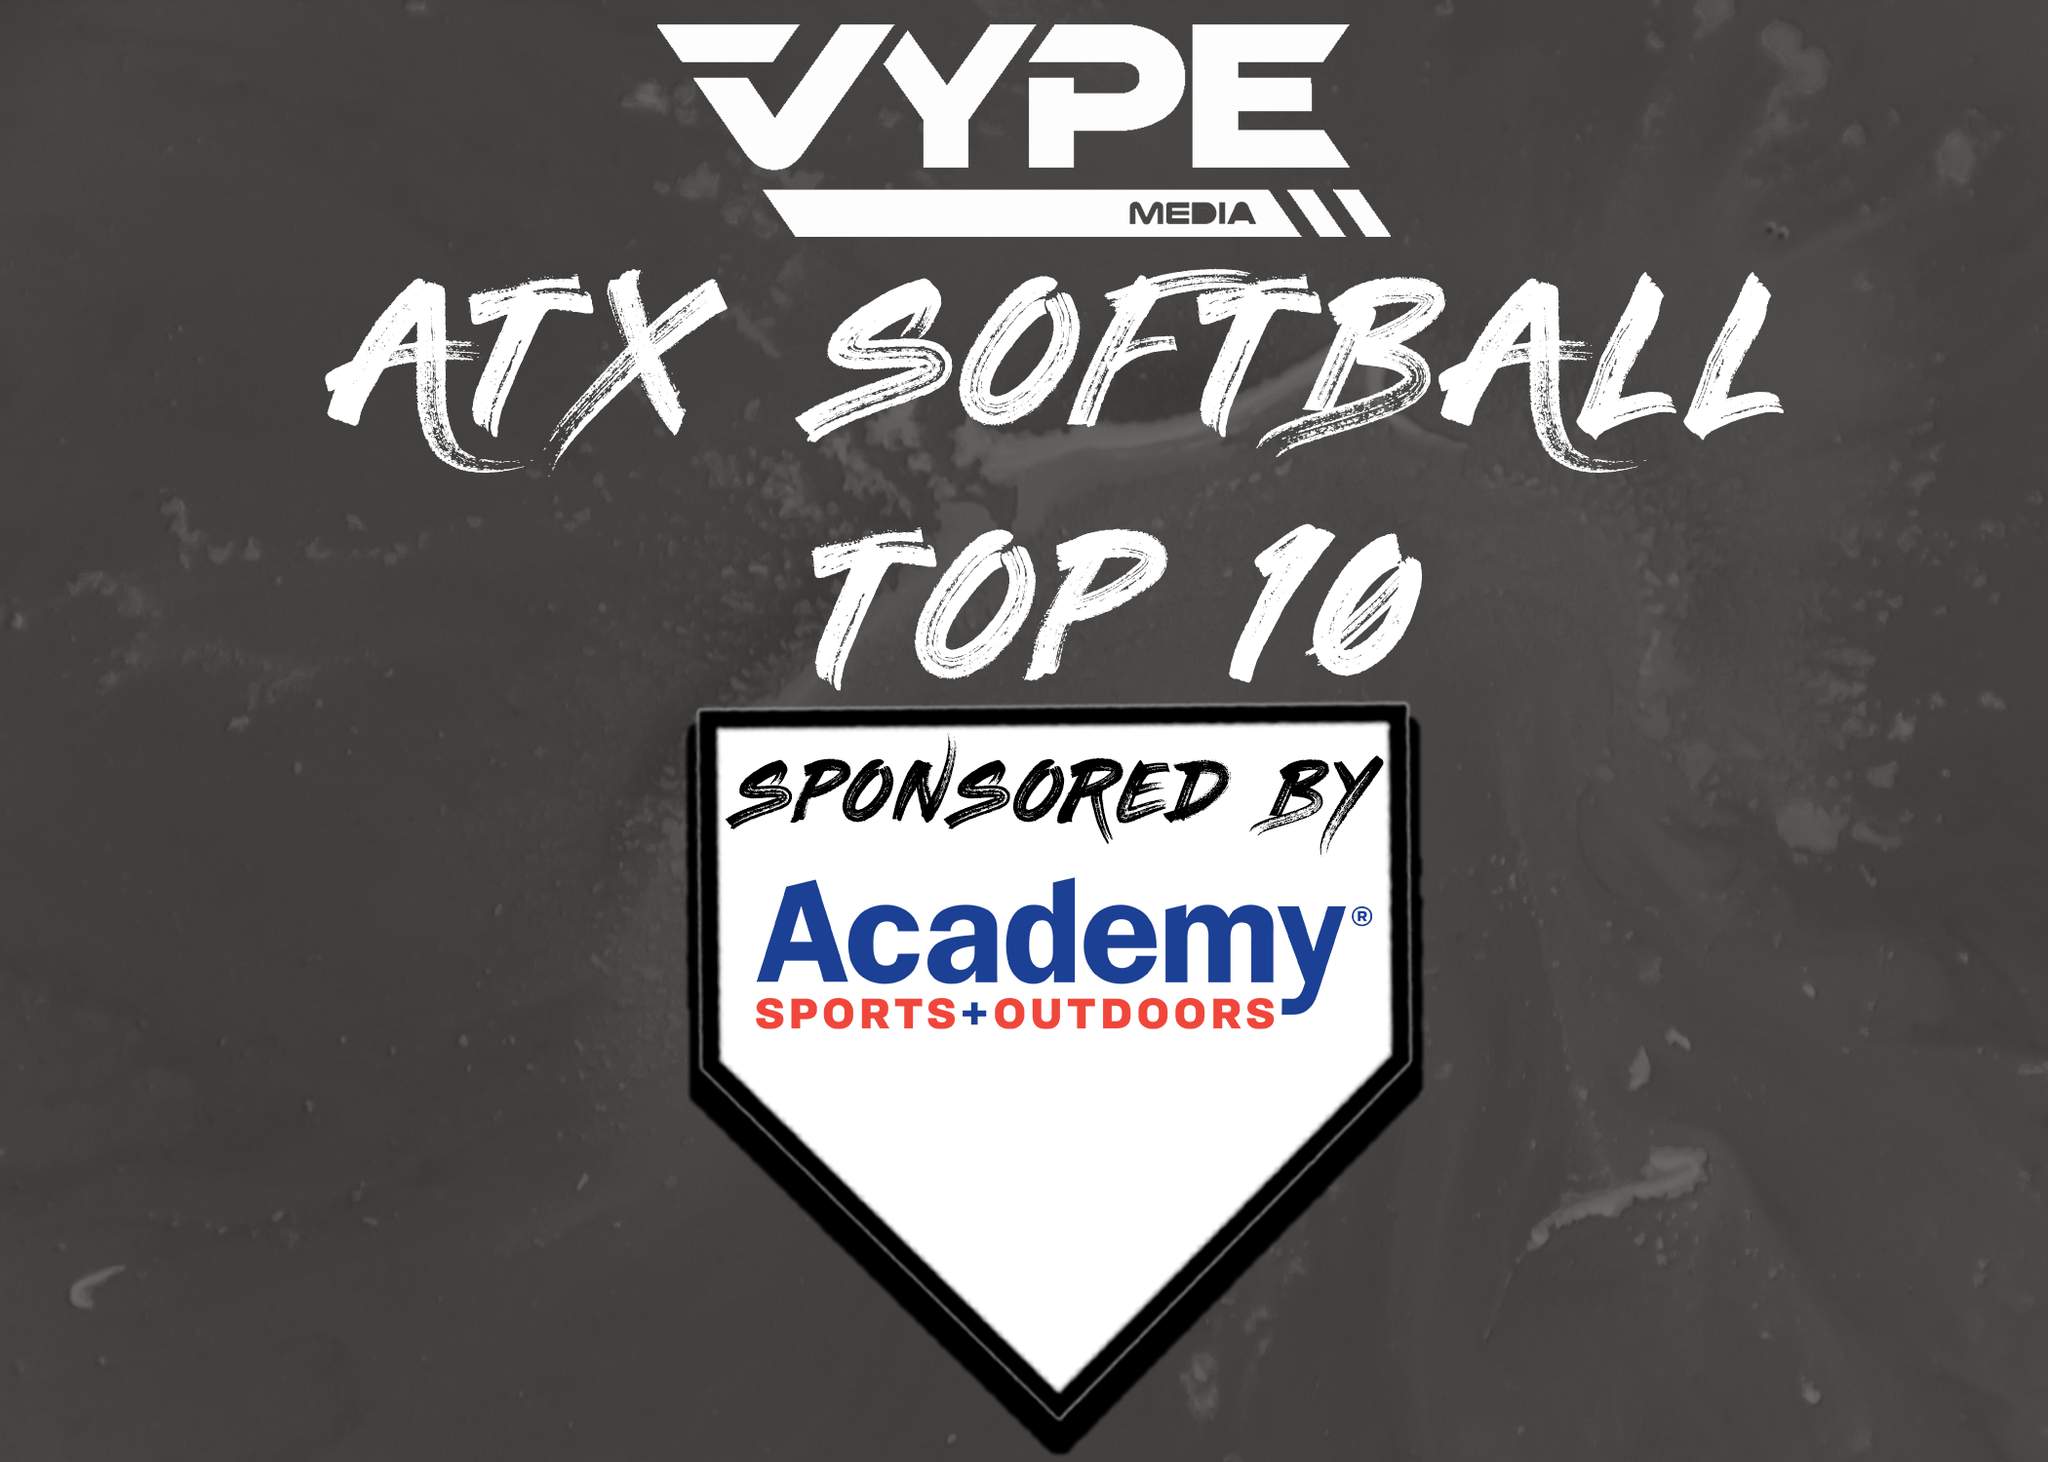 VYPE Austin Softball Top 10 Rankings: Week of 03/22/2021 presented by Academy Sports + Outdoors